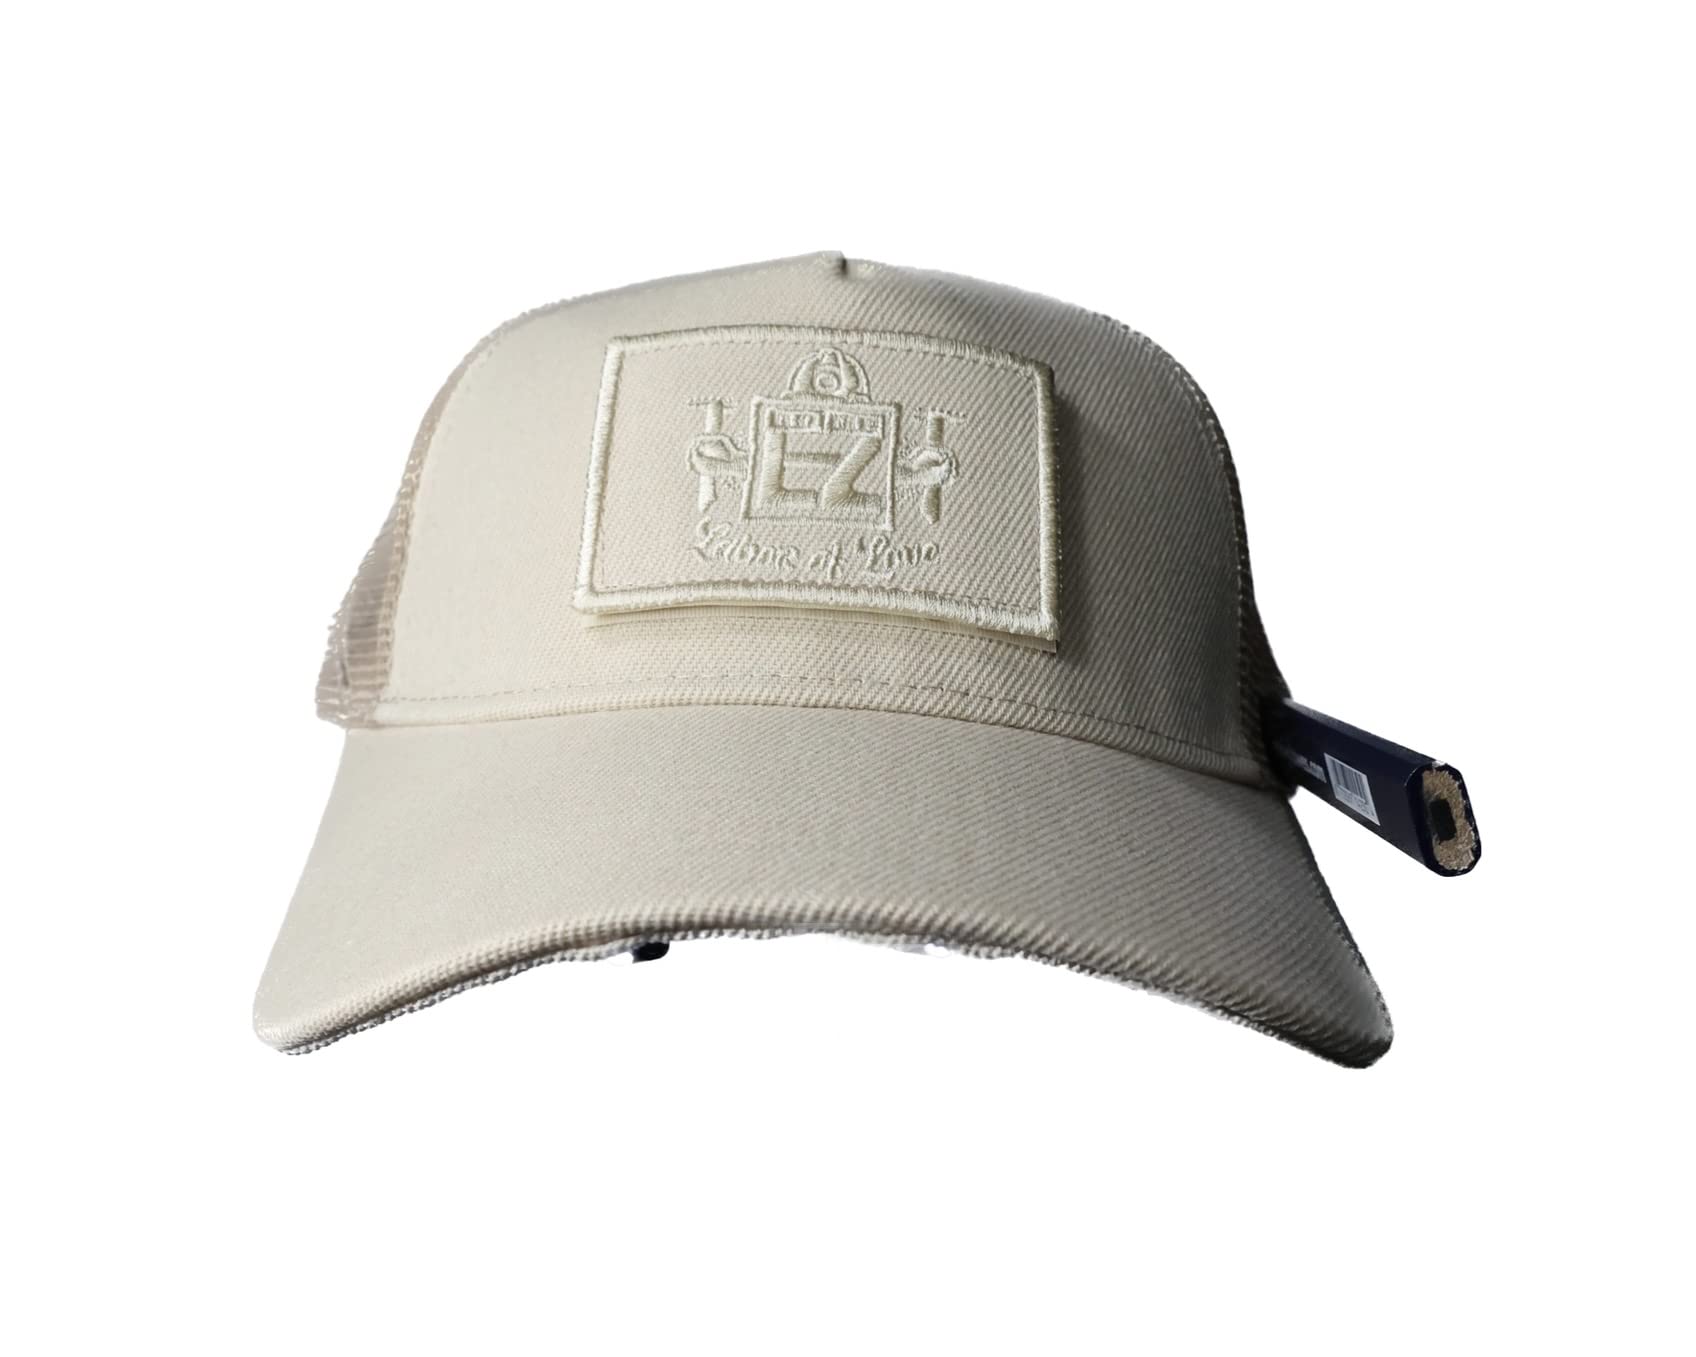 The Contractor hat by EZ Home